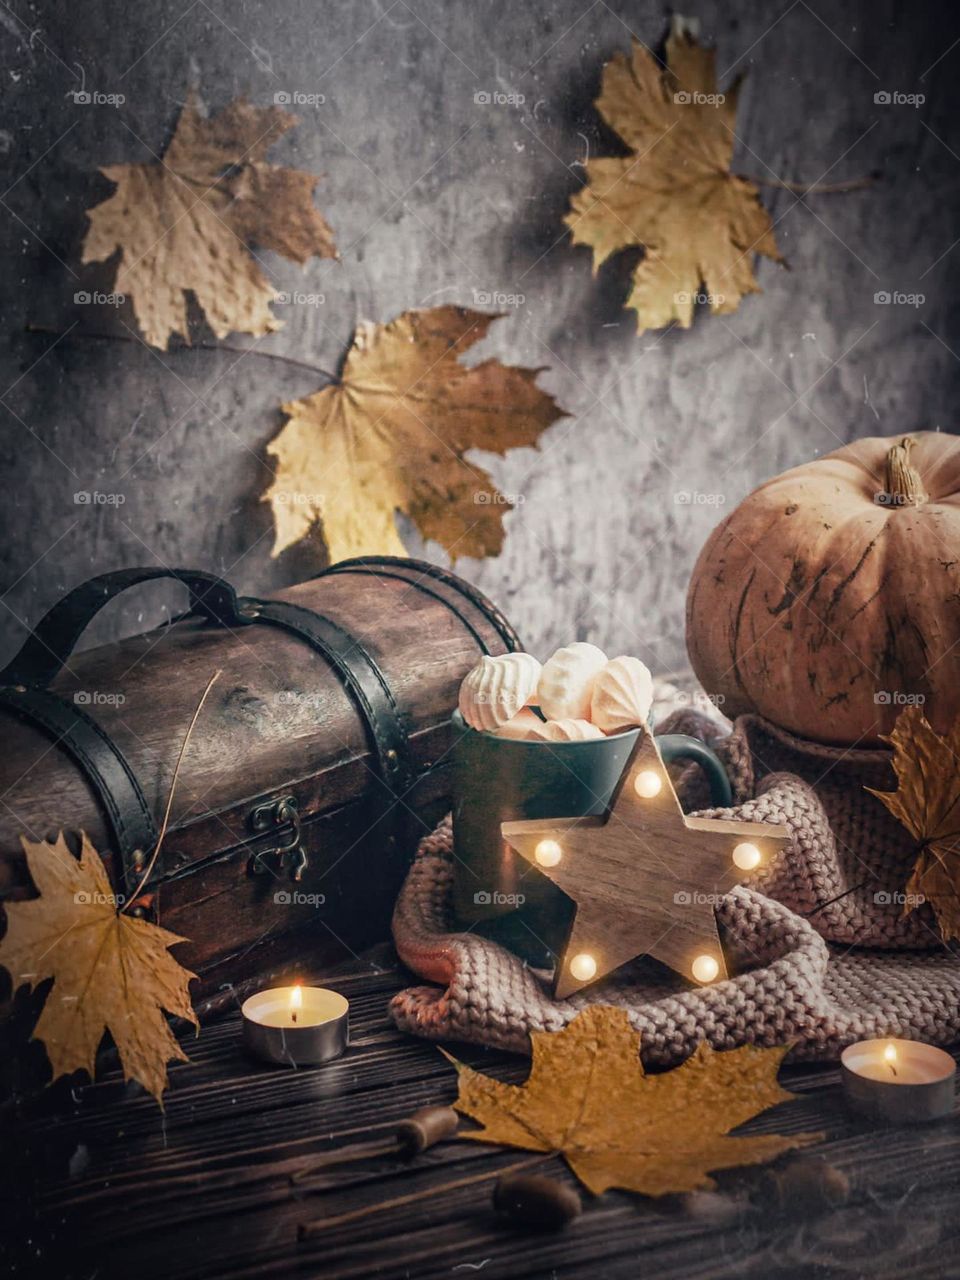 Autumn season view of halloween pumpkins on gray background with sweets and wooden chest